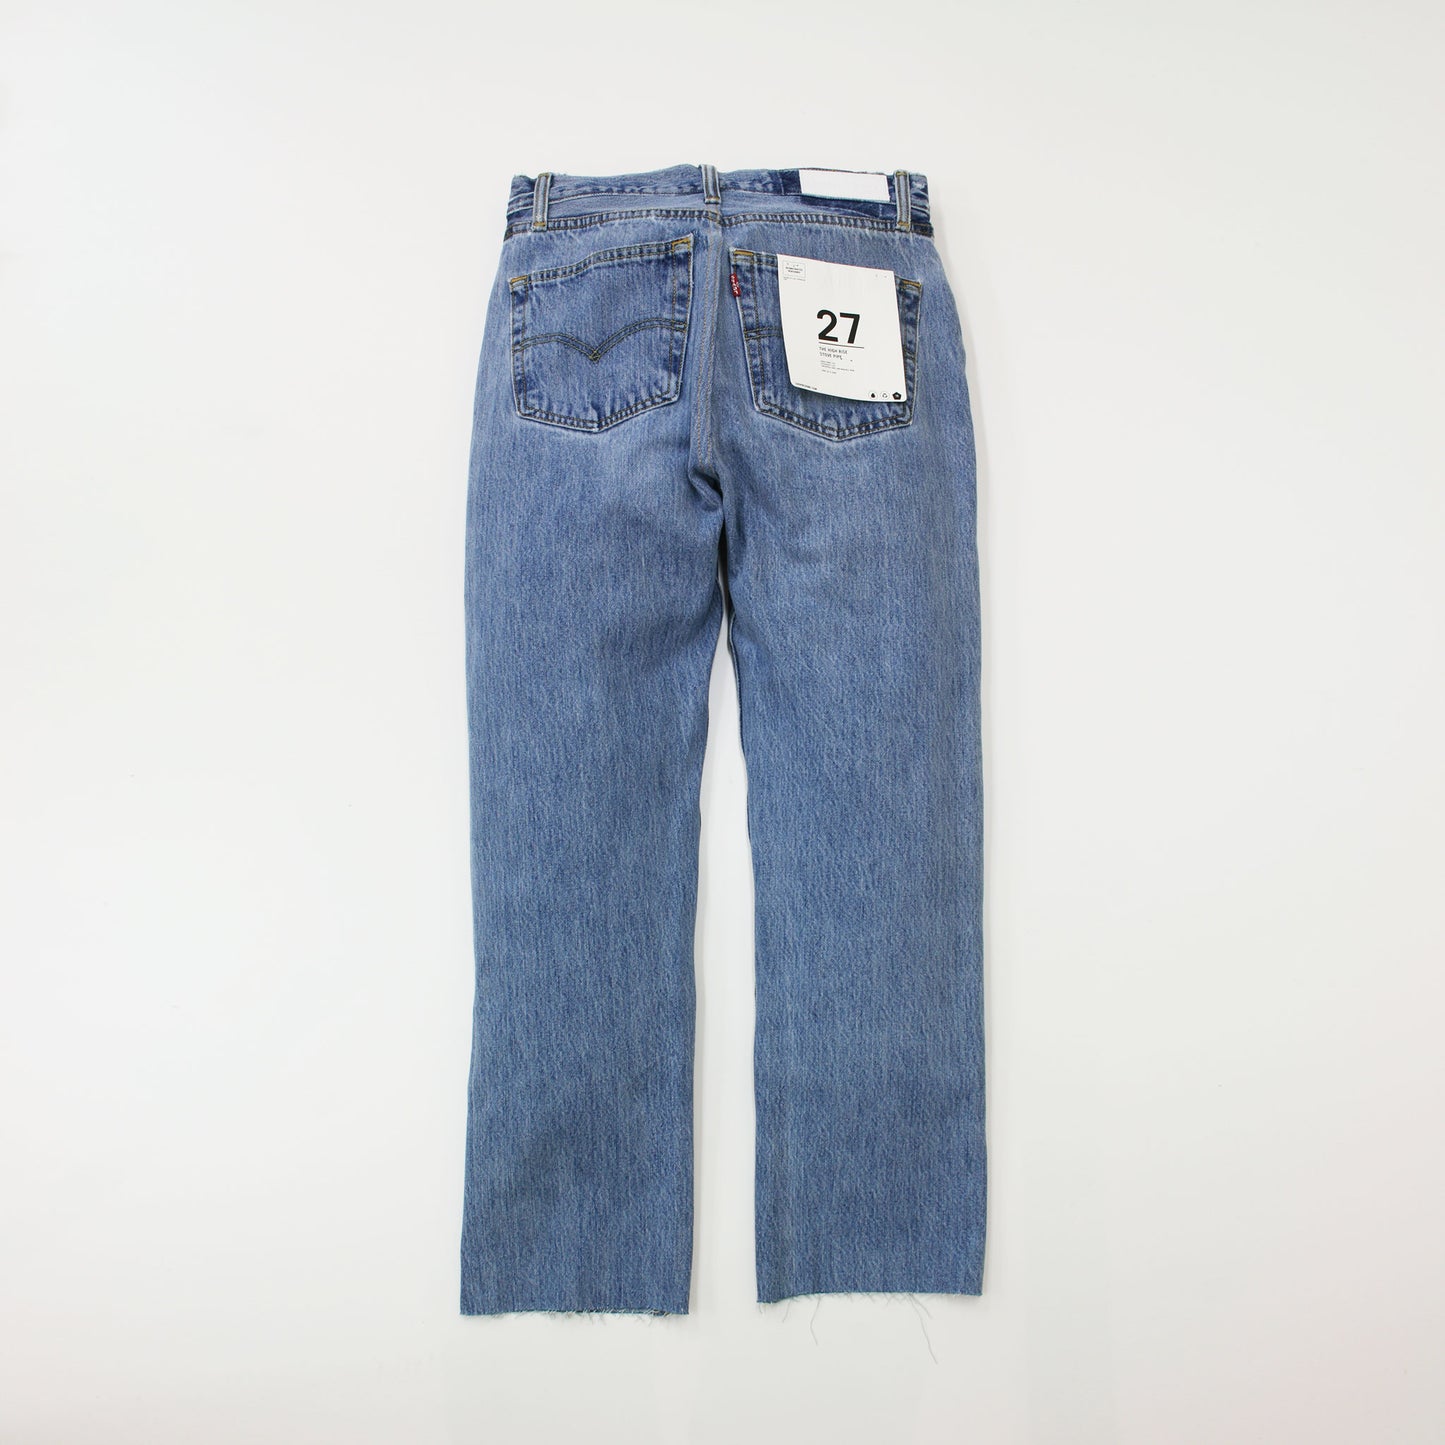 RE/DONE｜Levi's HIGH RISE STOVE PIPE size27A